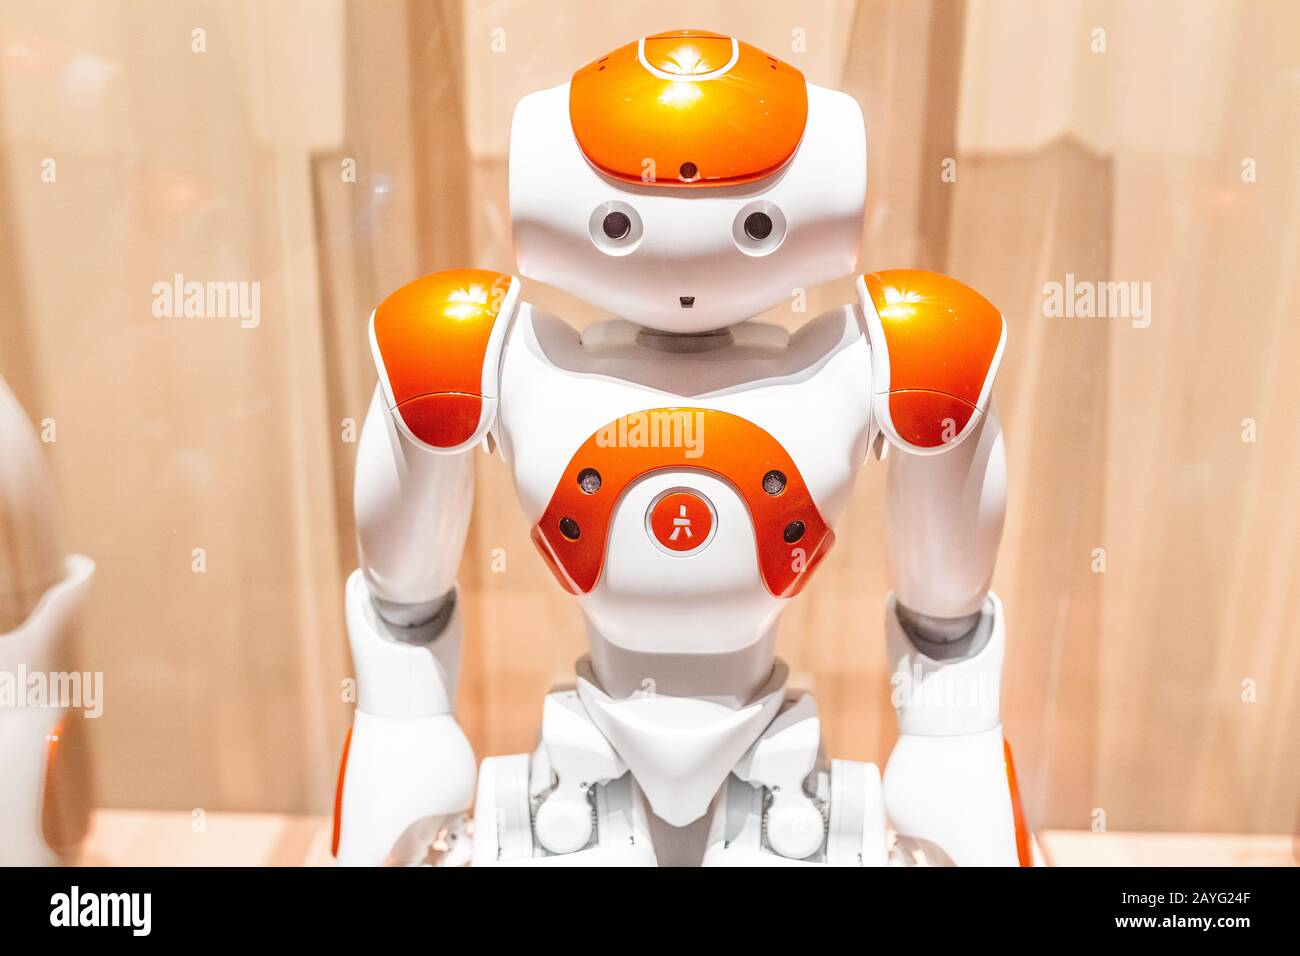 28 JULY 2018, BARCELONA, SPAIN: Nao robot in museum exhibition Stock Photo